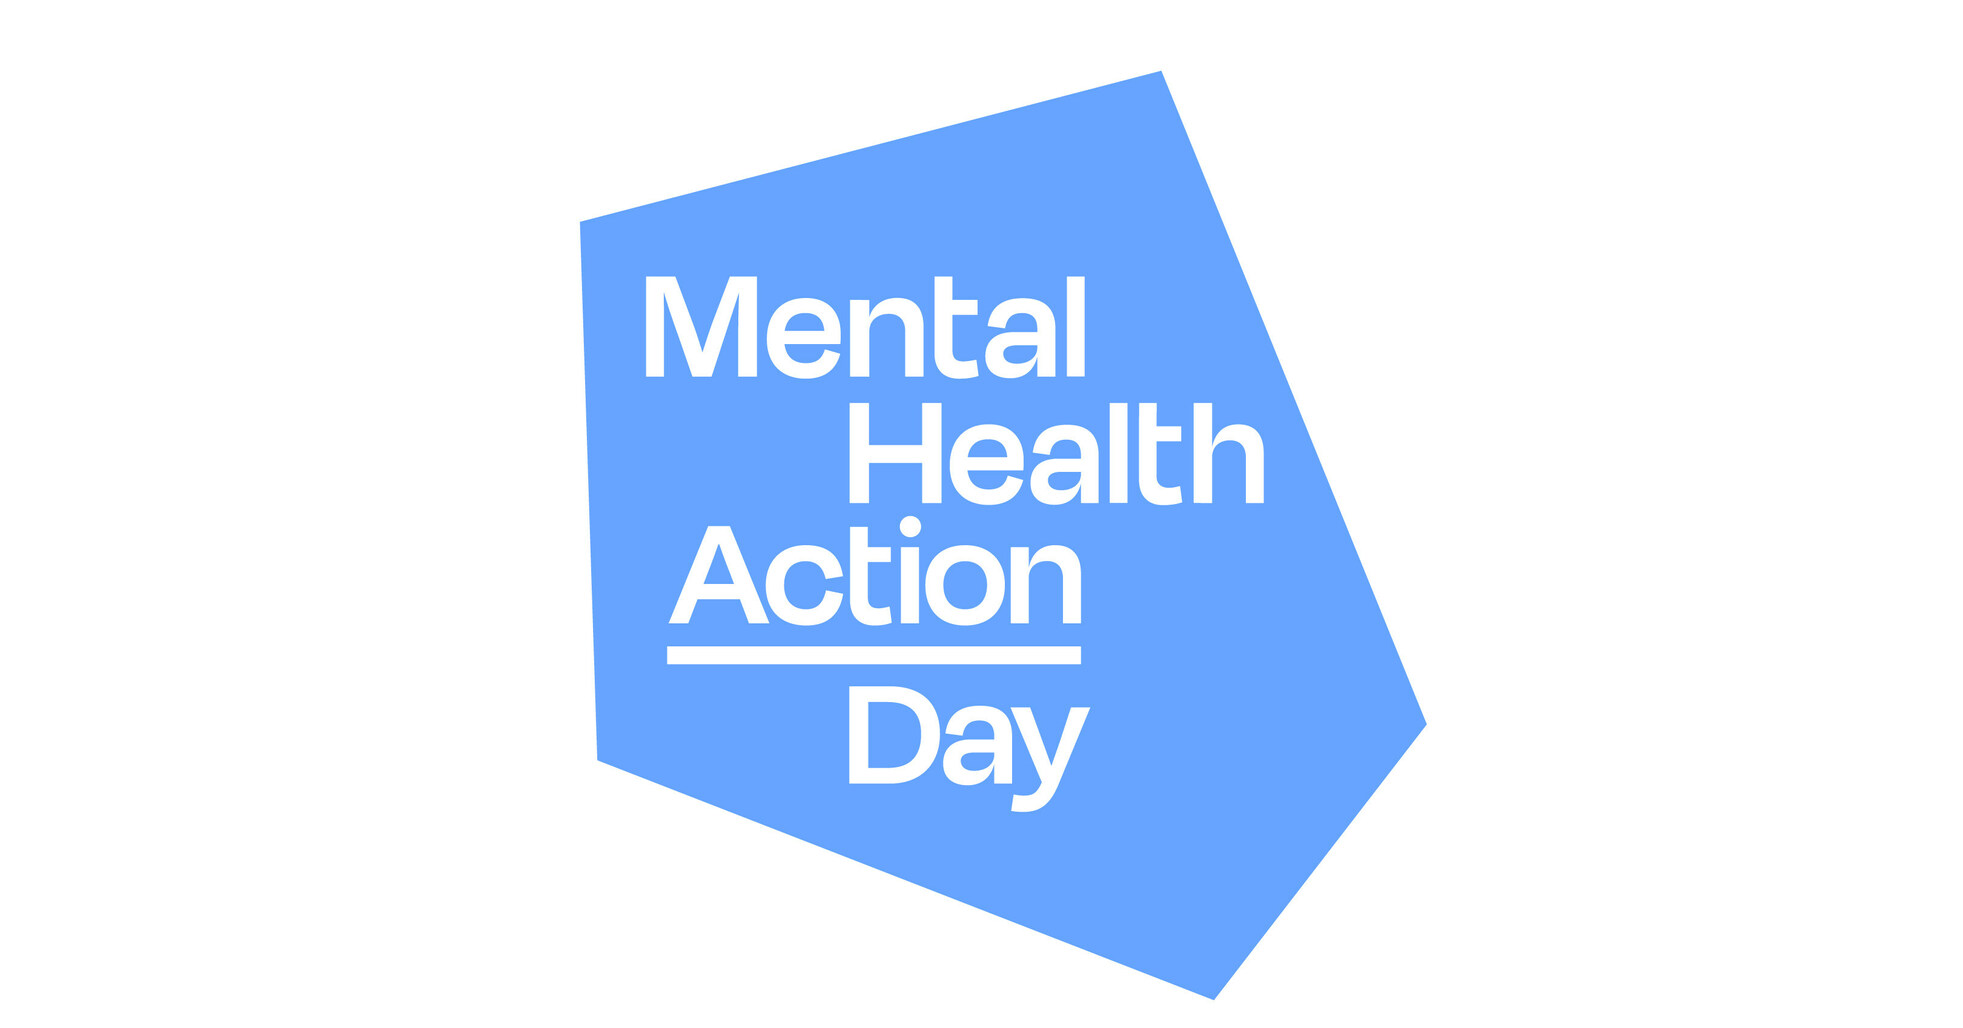 More Than 2,300 Nonprofits, Brands and Influential Leaders to Activate for Fourth Annual Mental Health Action Day on Thursday, May 16